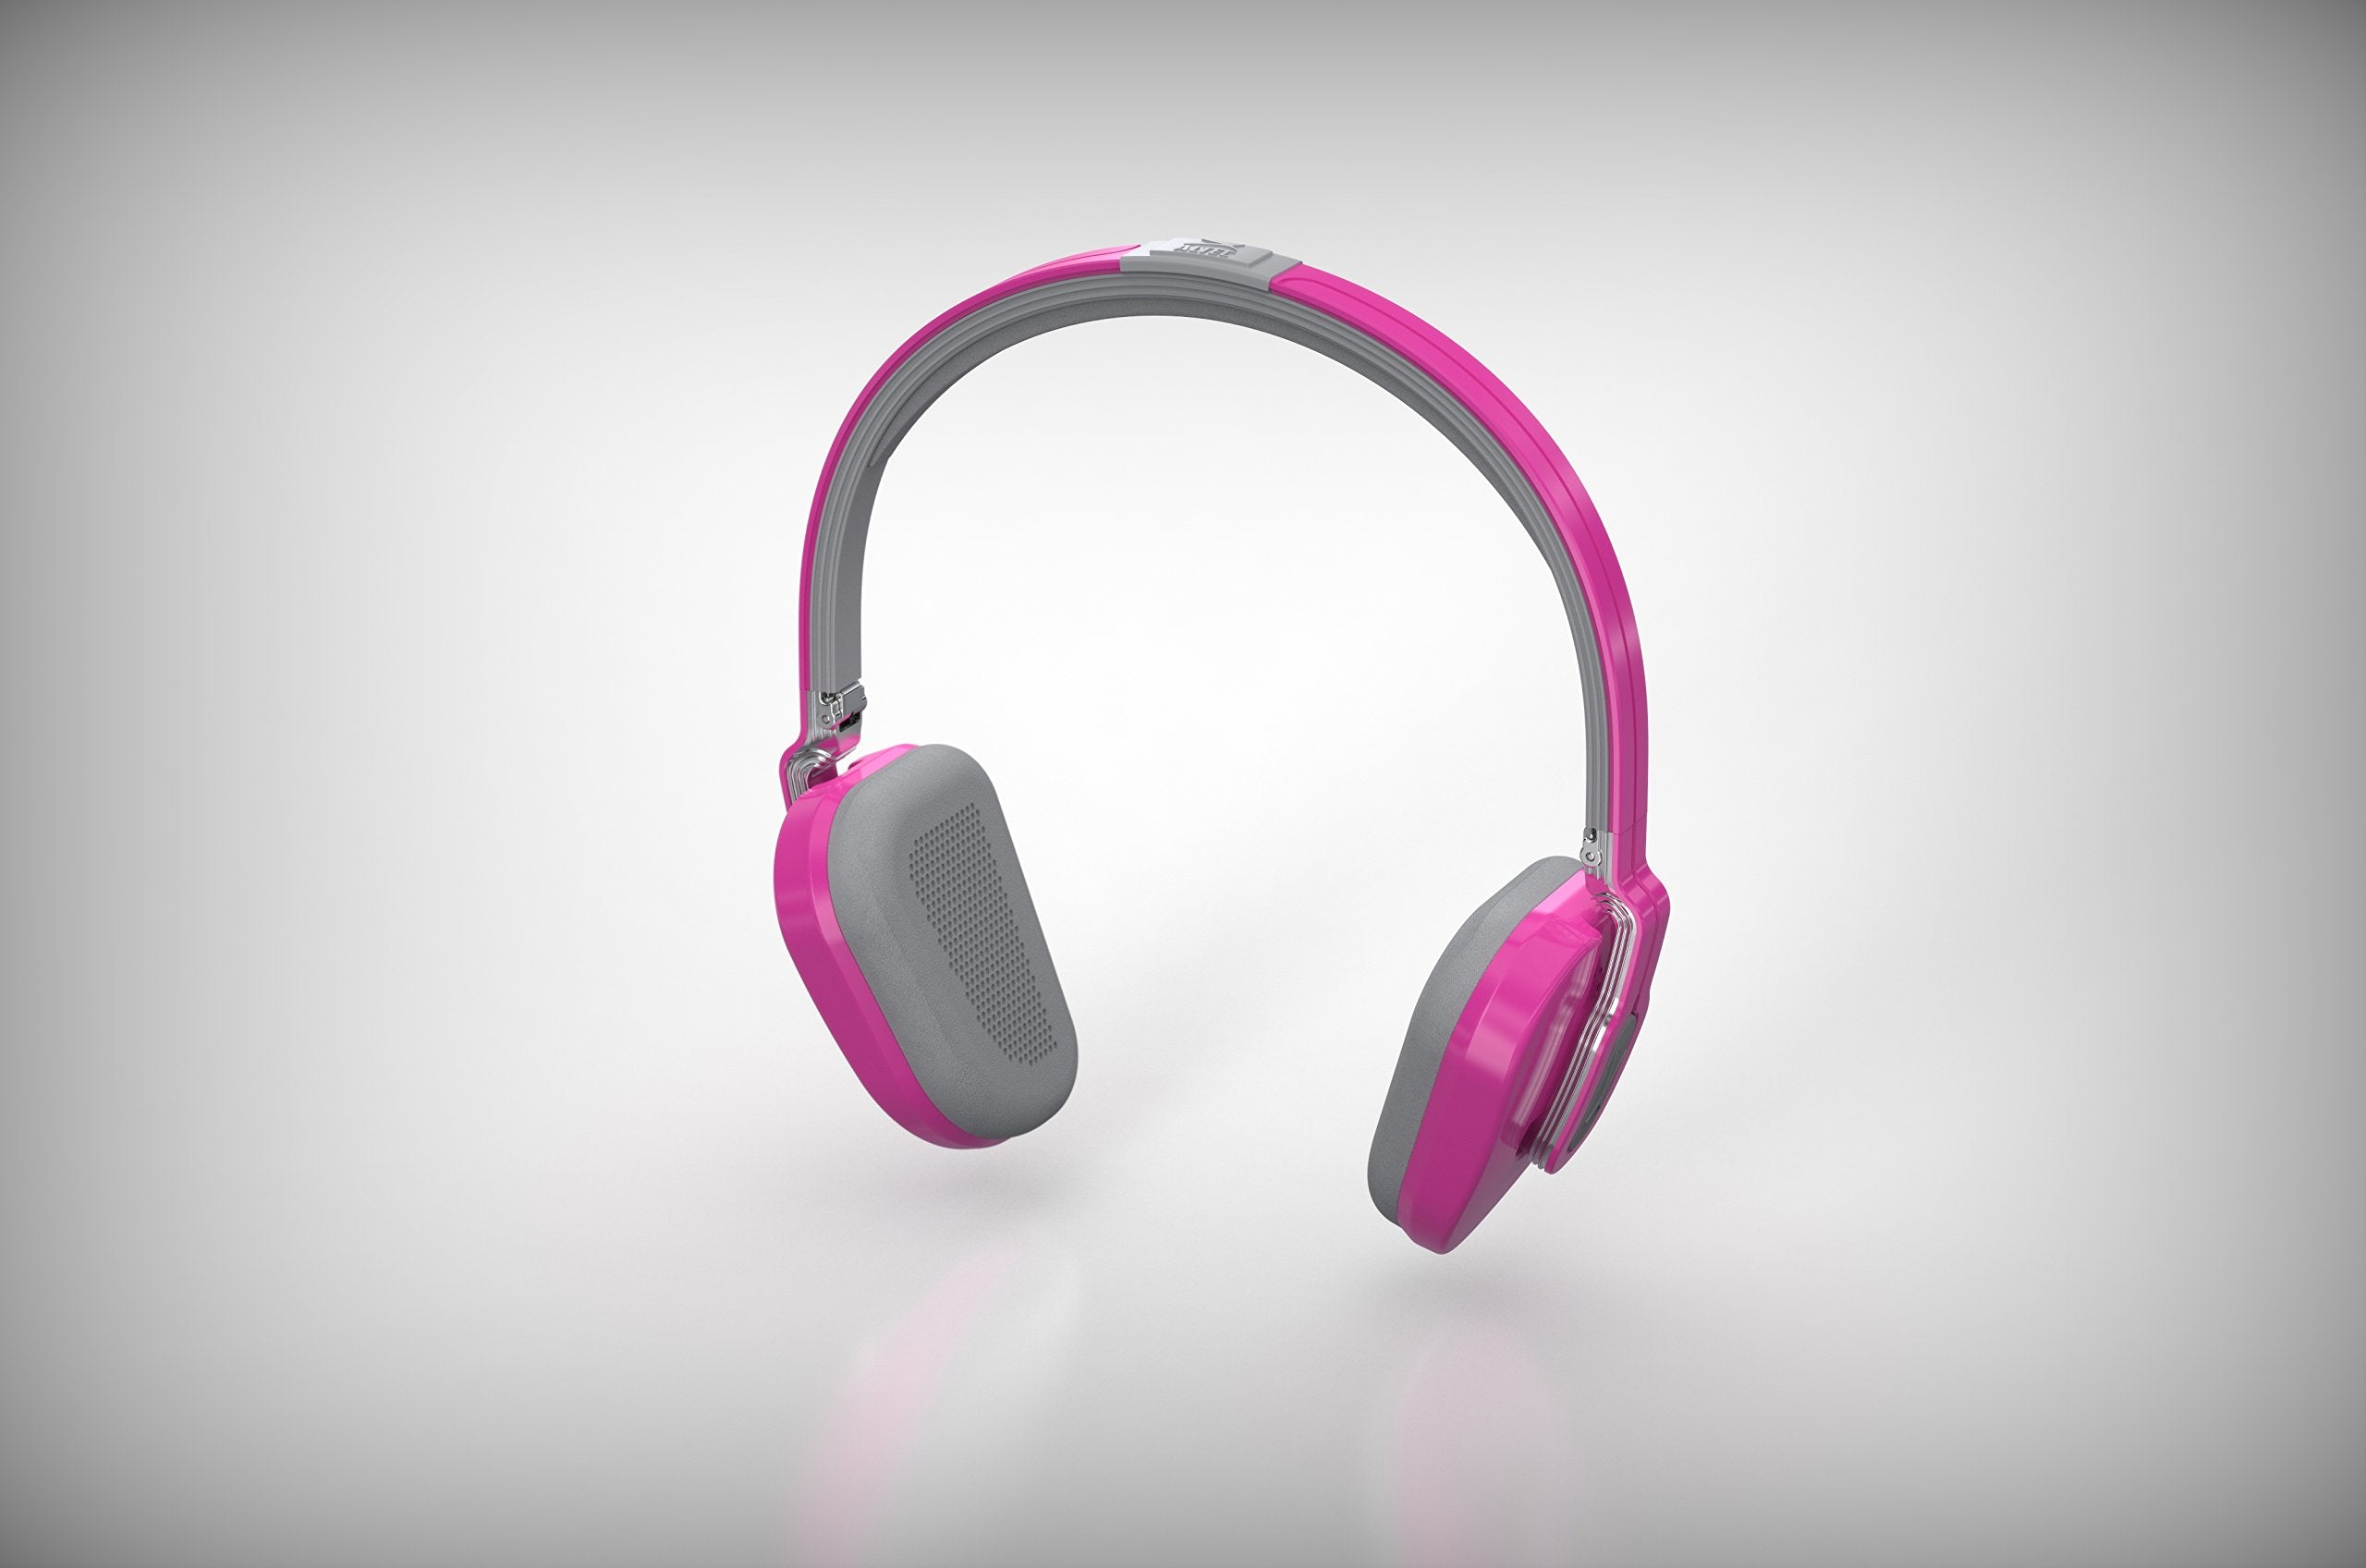 Altec Lansing Over the Head Foldable Headphone with Mic, Pink - MZX662